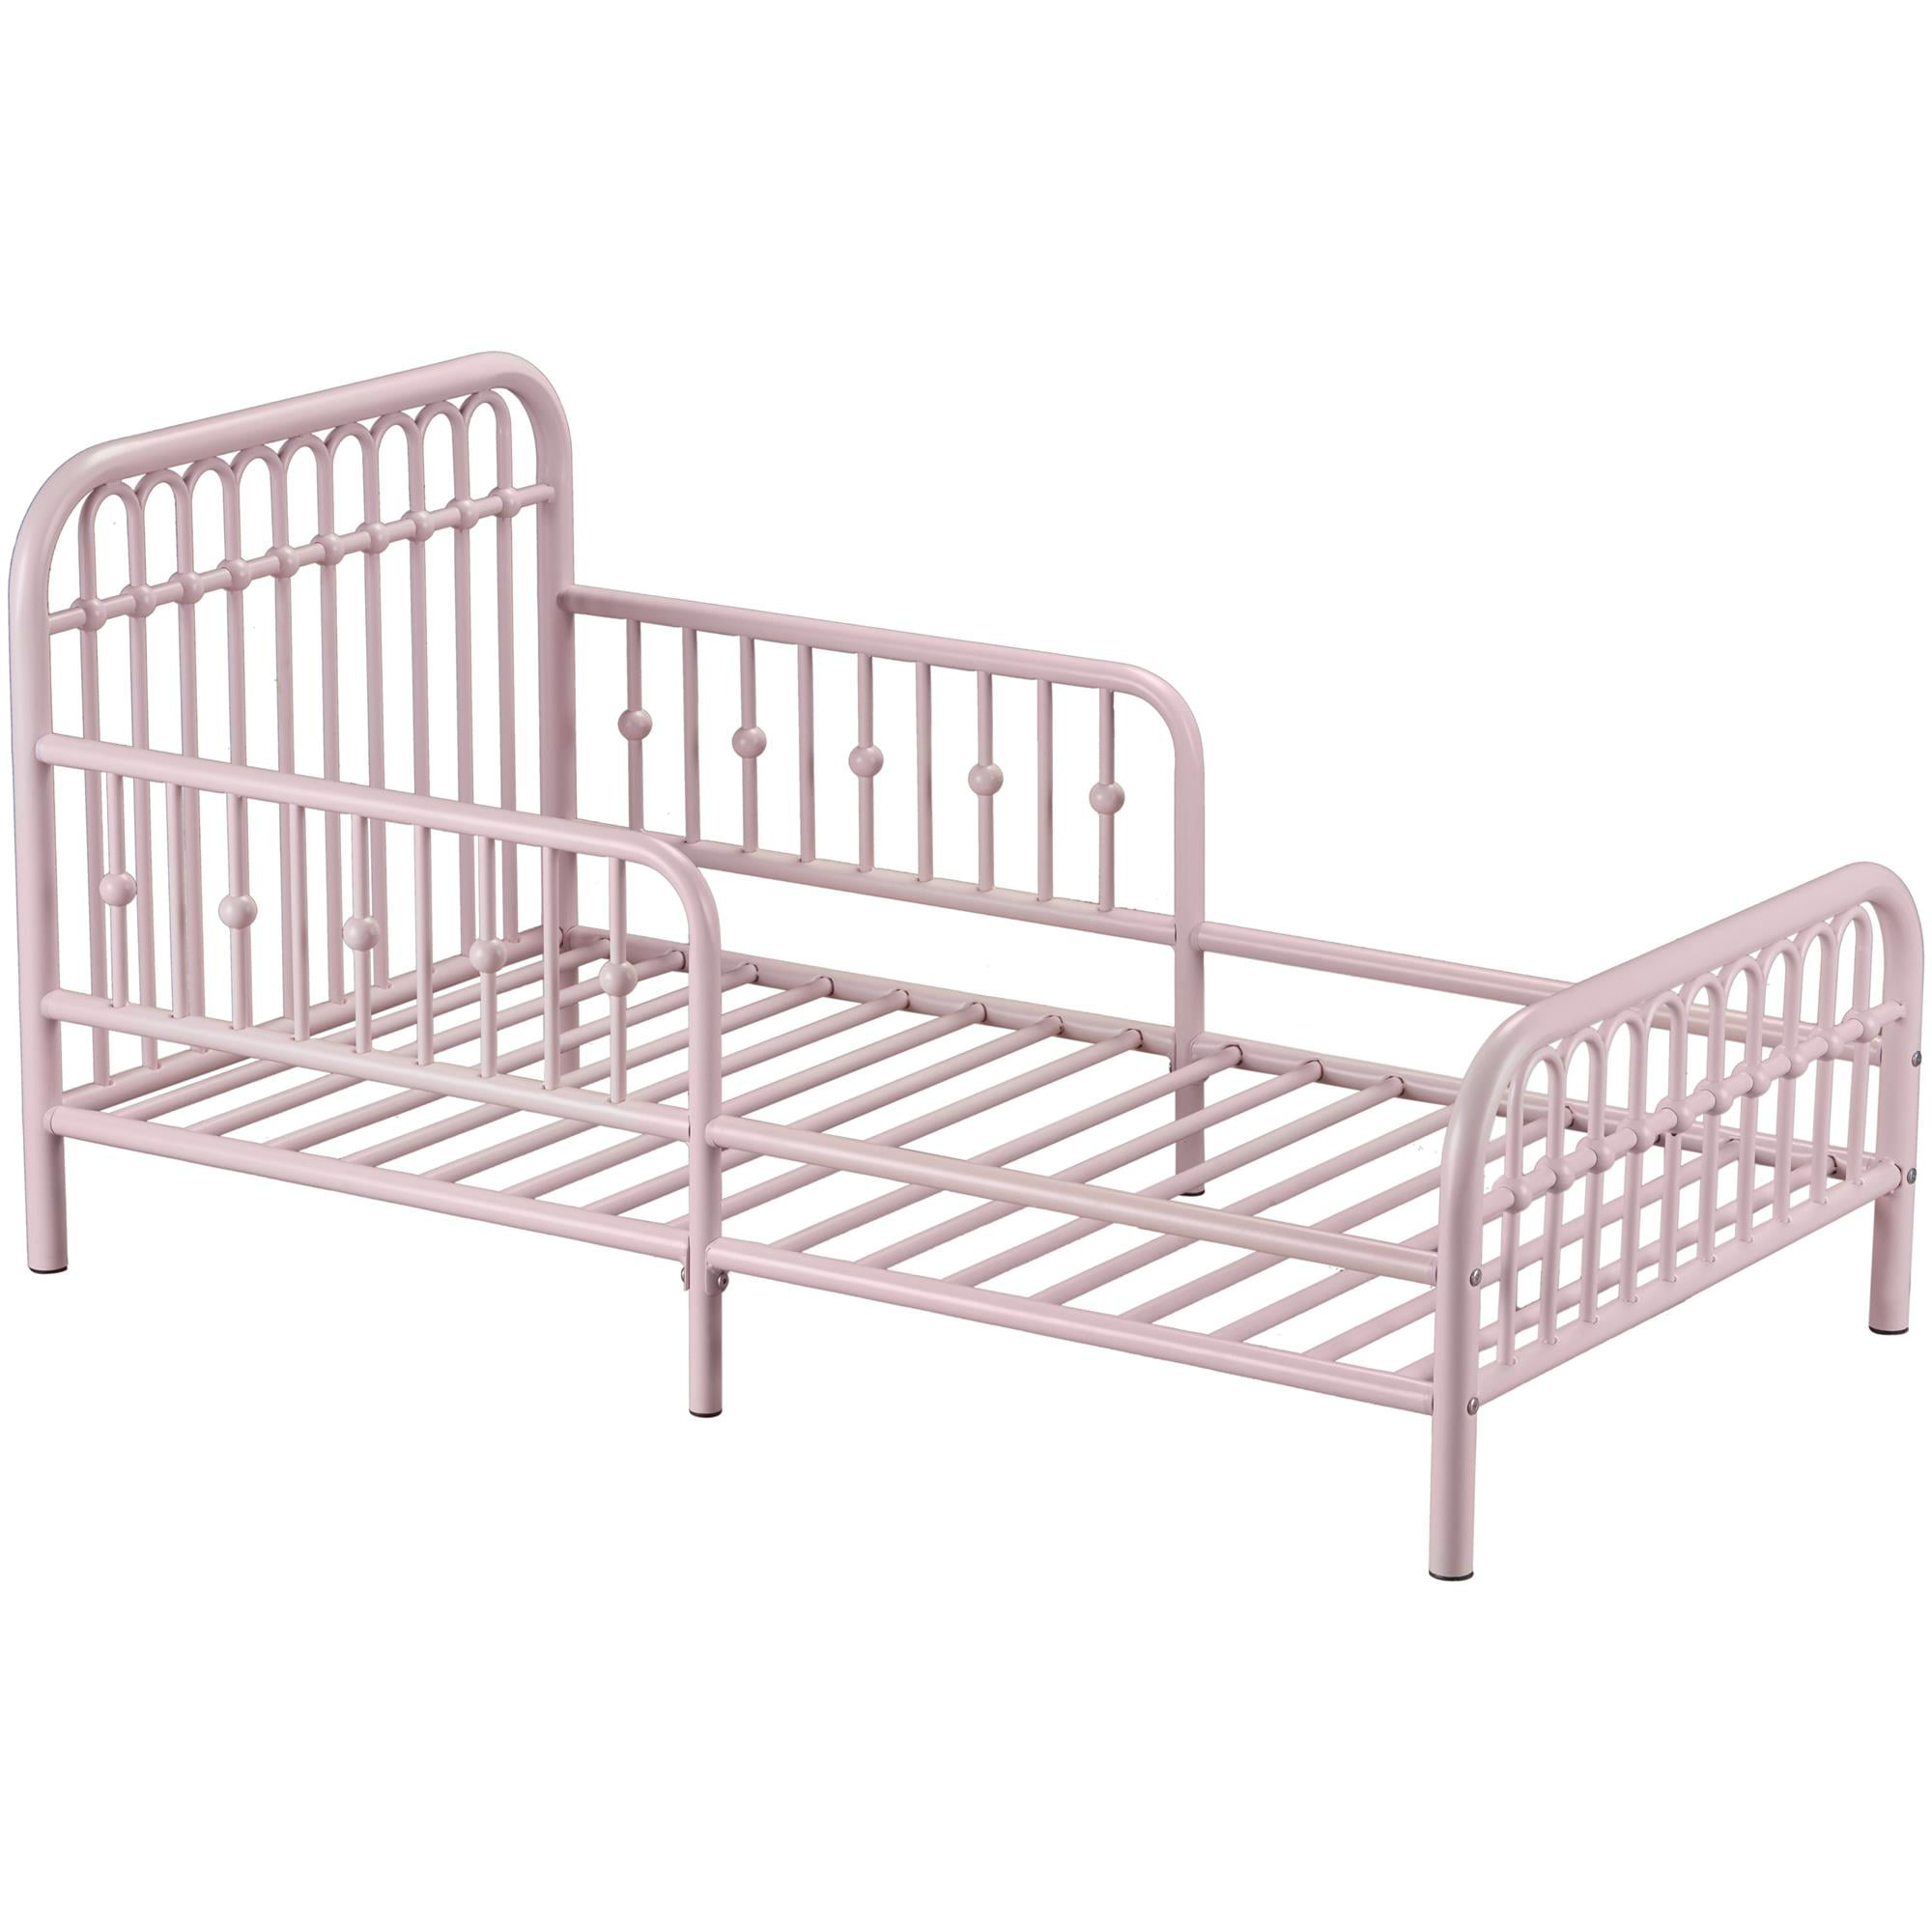 Little Seeds Monarch Hill Ivy Metal Toddler Bed Pink 